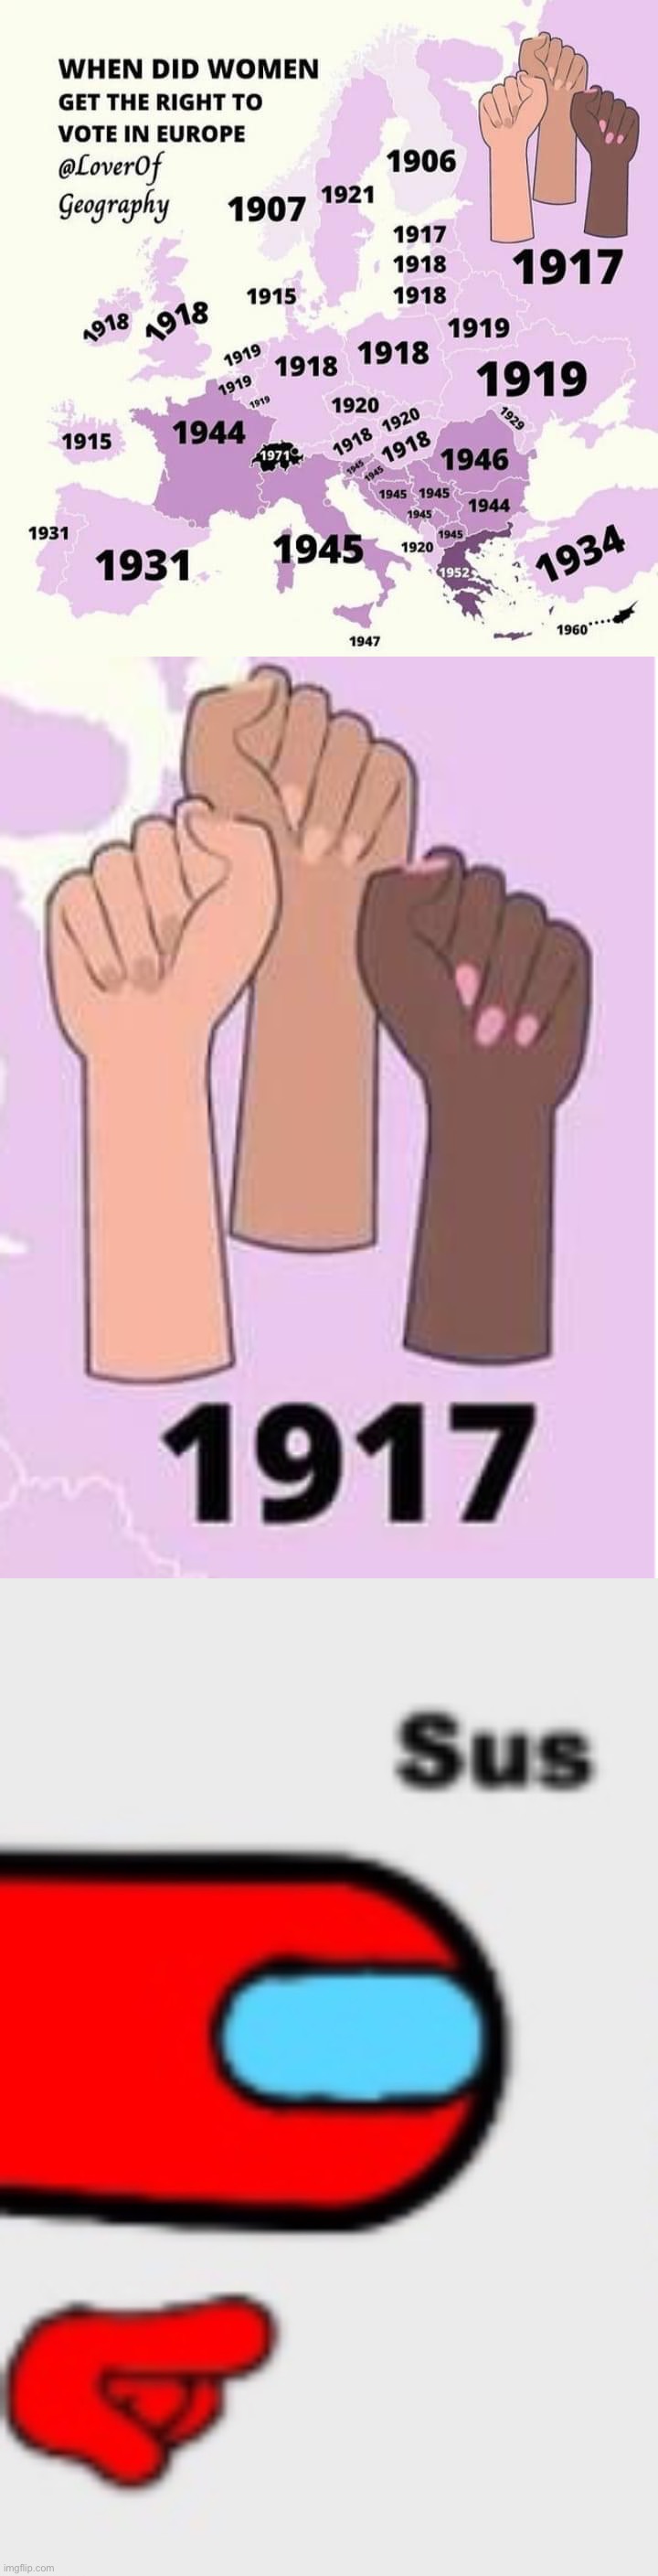 1917 is when women in Russia got the meaningless right to ratify Bolshevik rule, apparently | image tagged in when did women get the right to vote in europe,among us sus zoomed,russia,meanwhile in russia,hmmm,sus | made w/ Imgflip meme maker